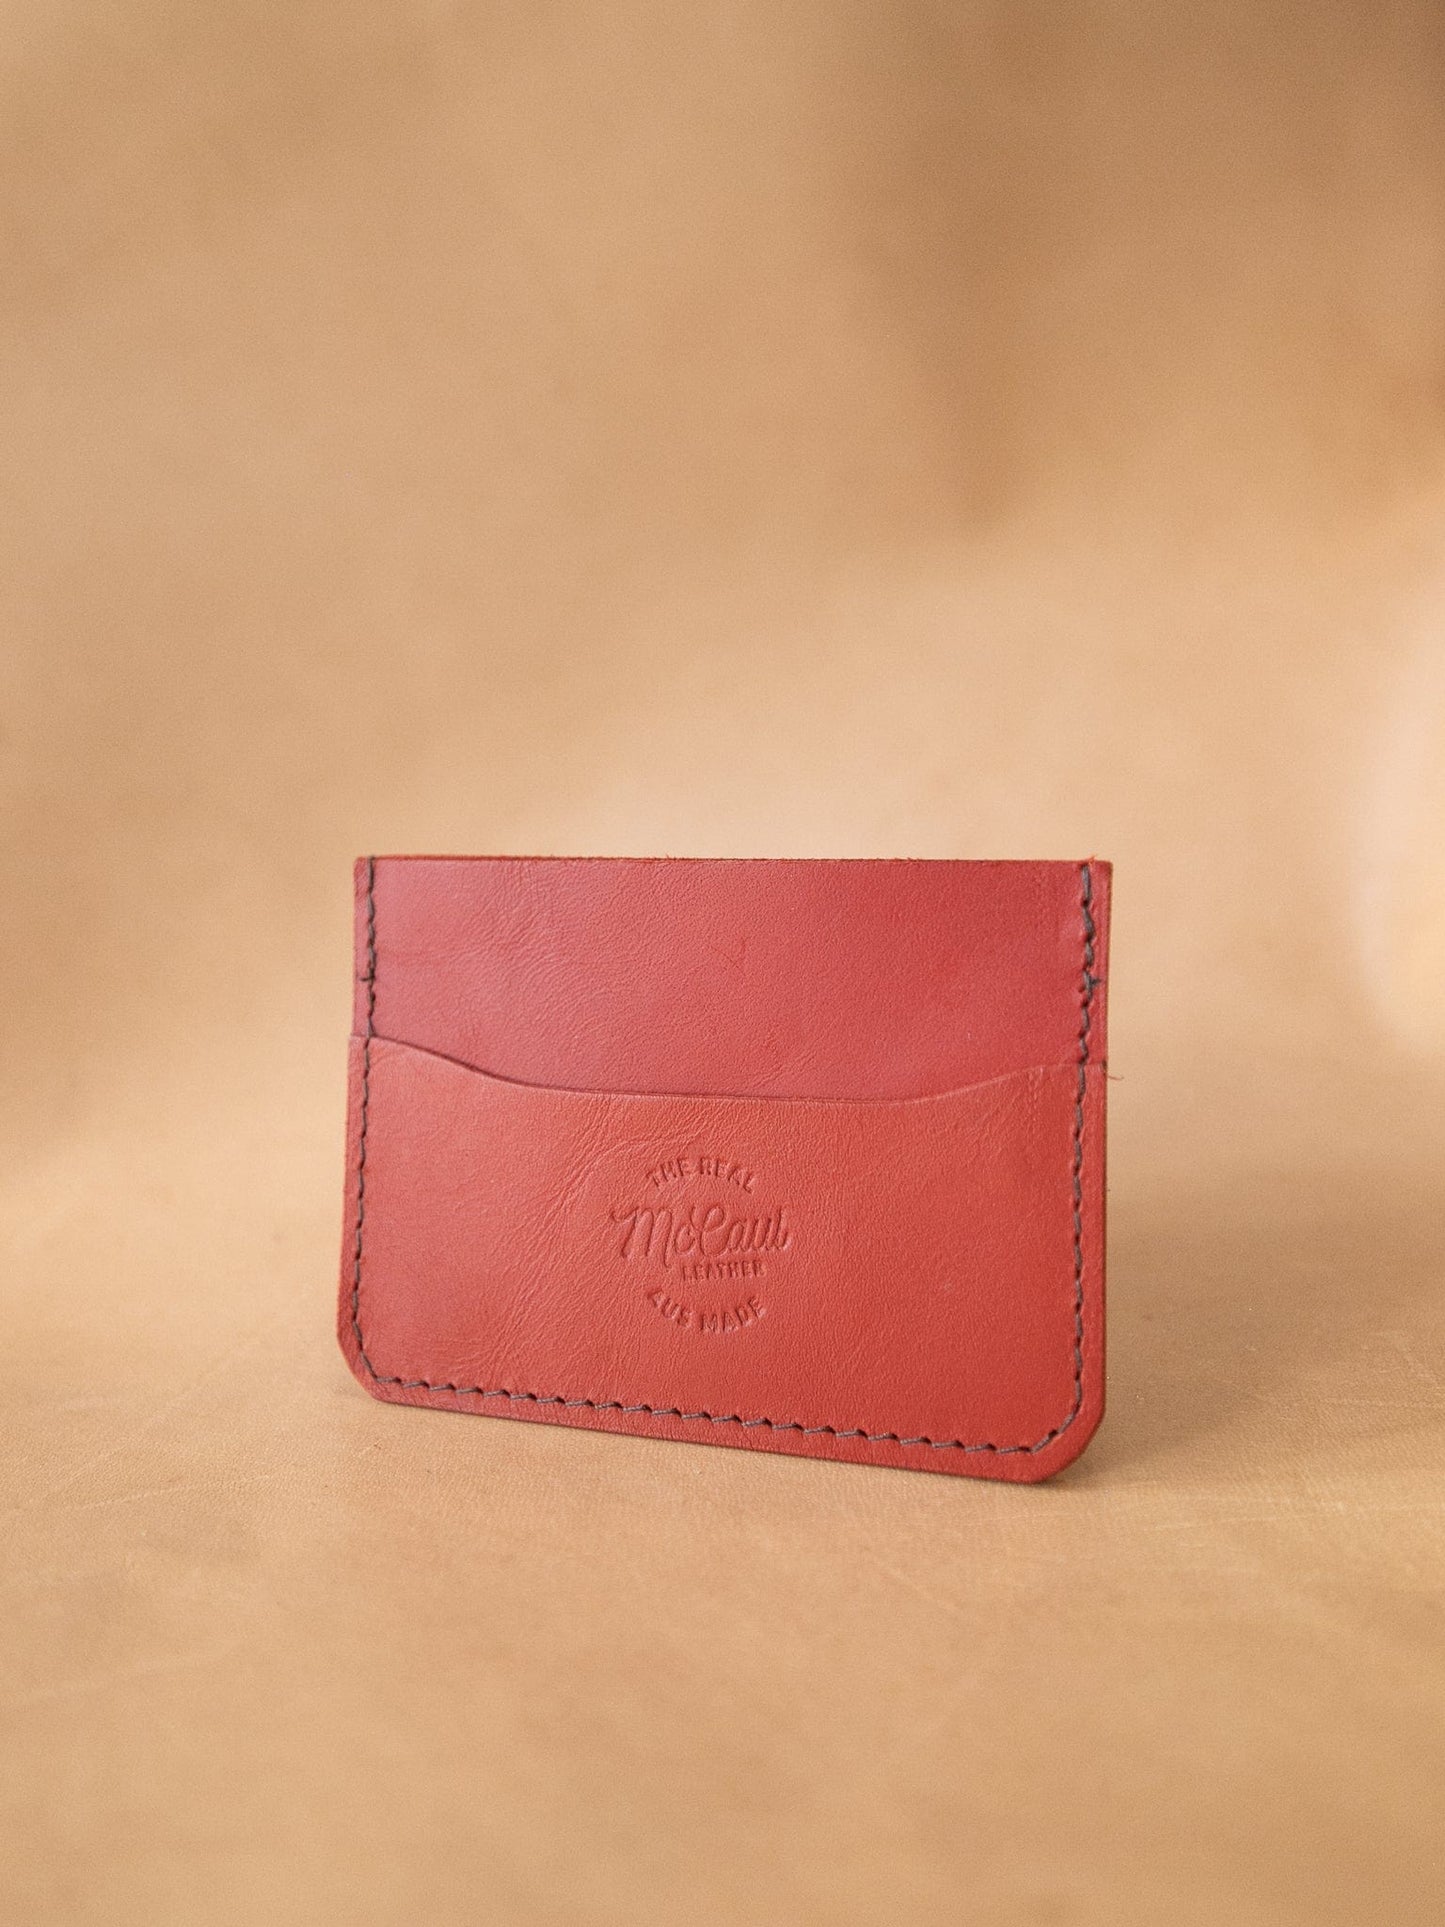 The Real McCaul Leathergoods Wallet Red Card Holder Wallet - Three Pocket Australian Made Australian Owned Leather Card Holder Wallet - Three Pocket Made in Australia